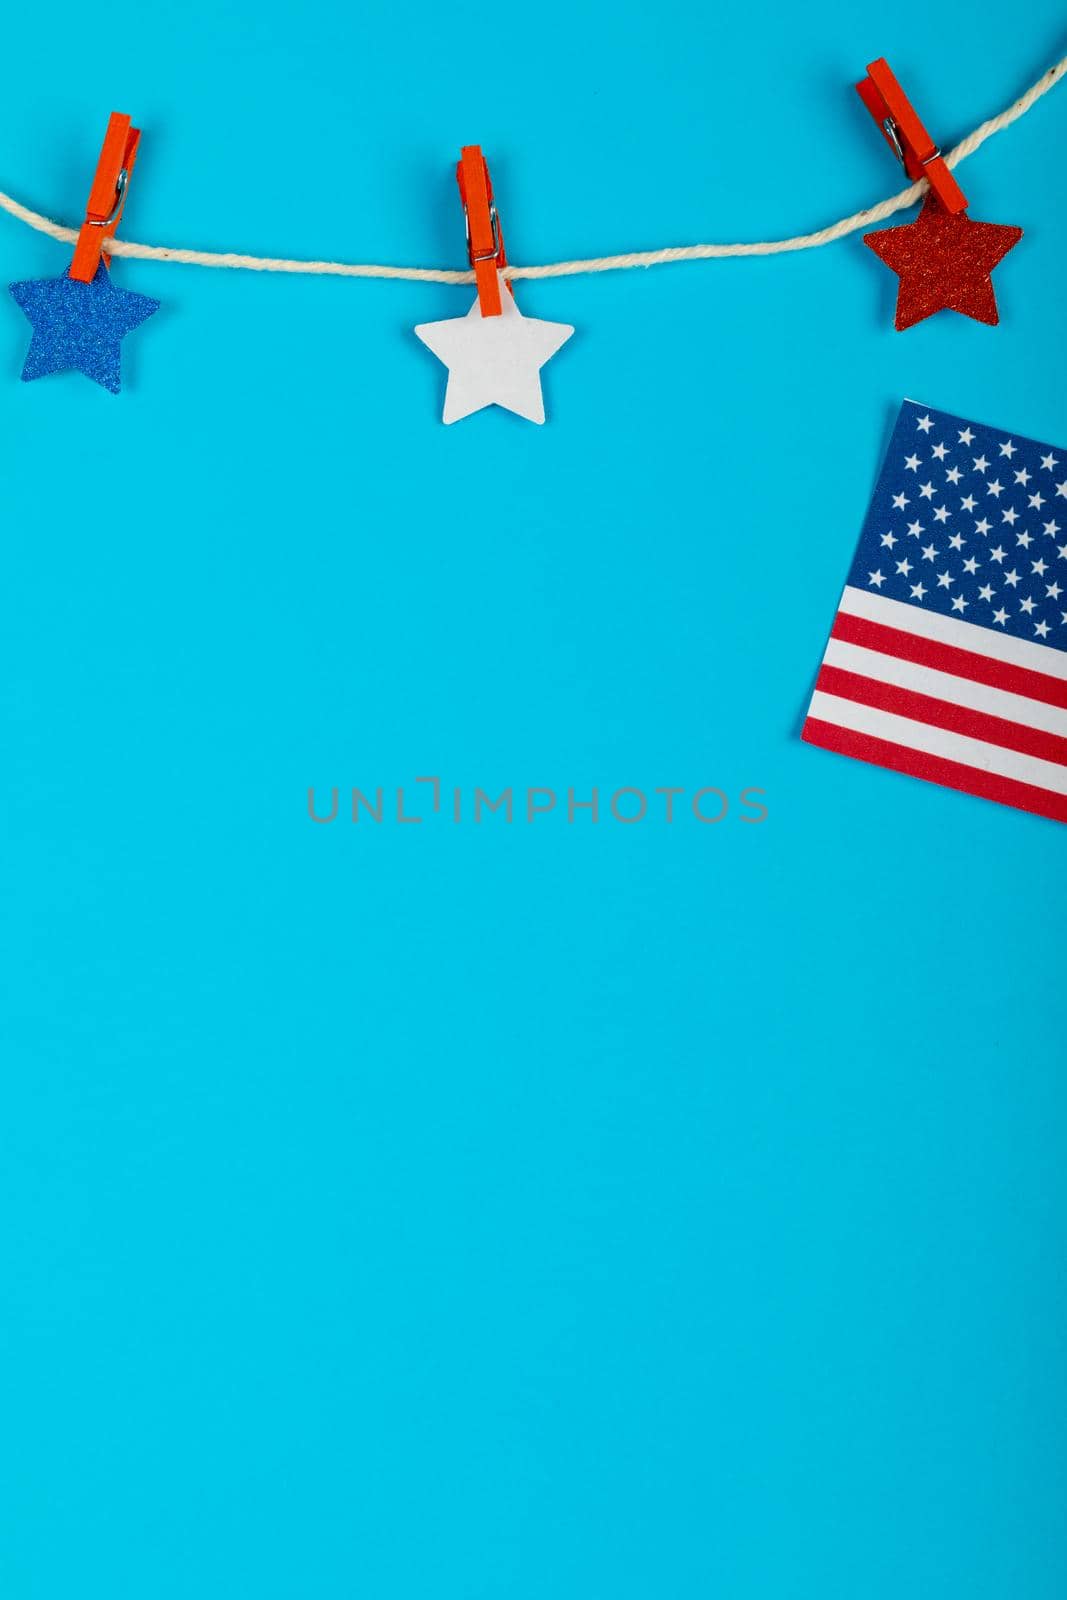 Clothespins holding star shapes on string by usa flag with copy space on blue background. patriotism and identity.